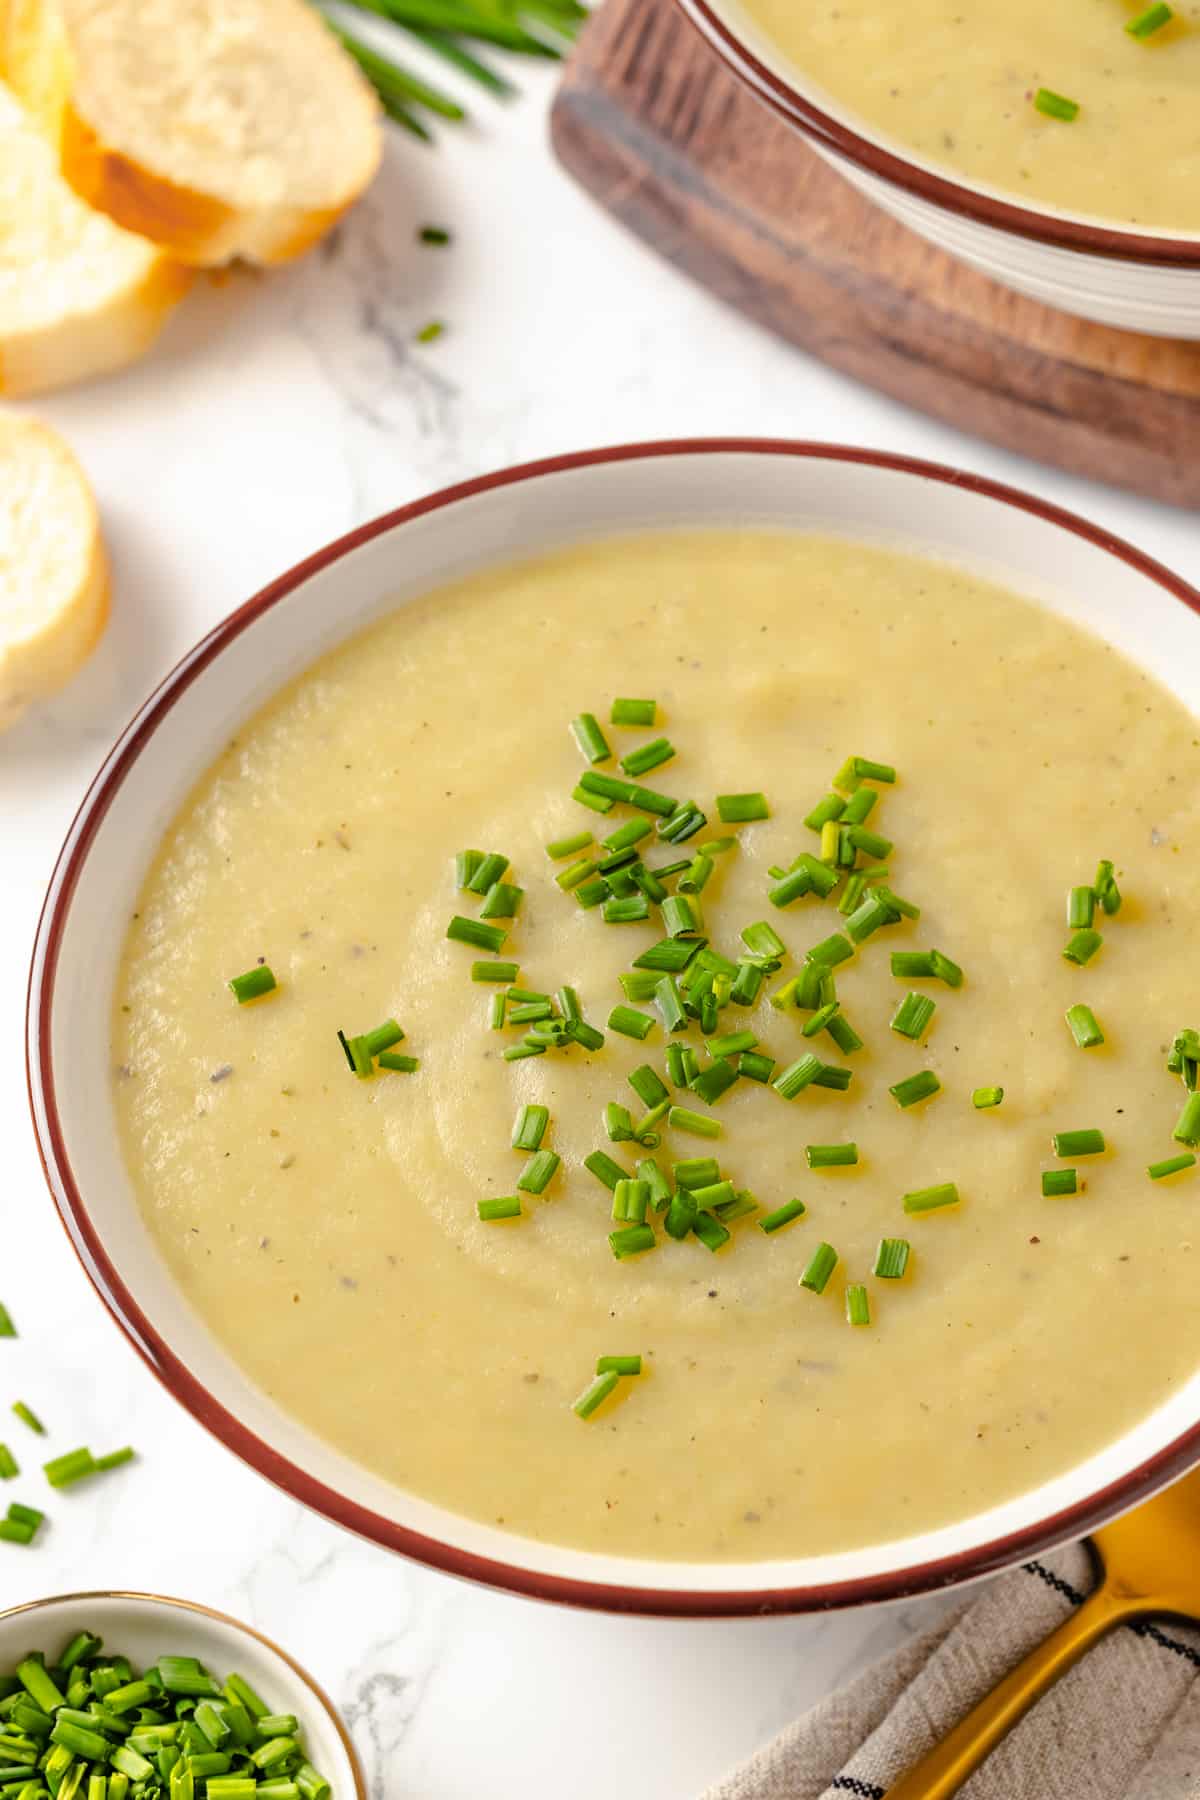 Bowl of creamy vichyssoise with chives for garnish